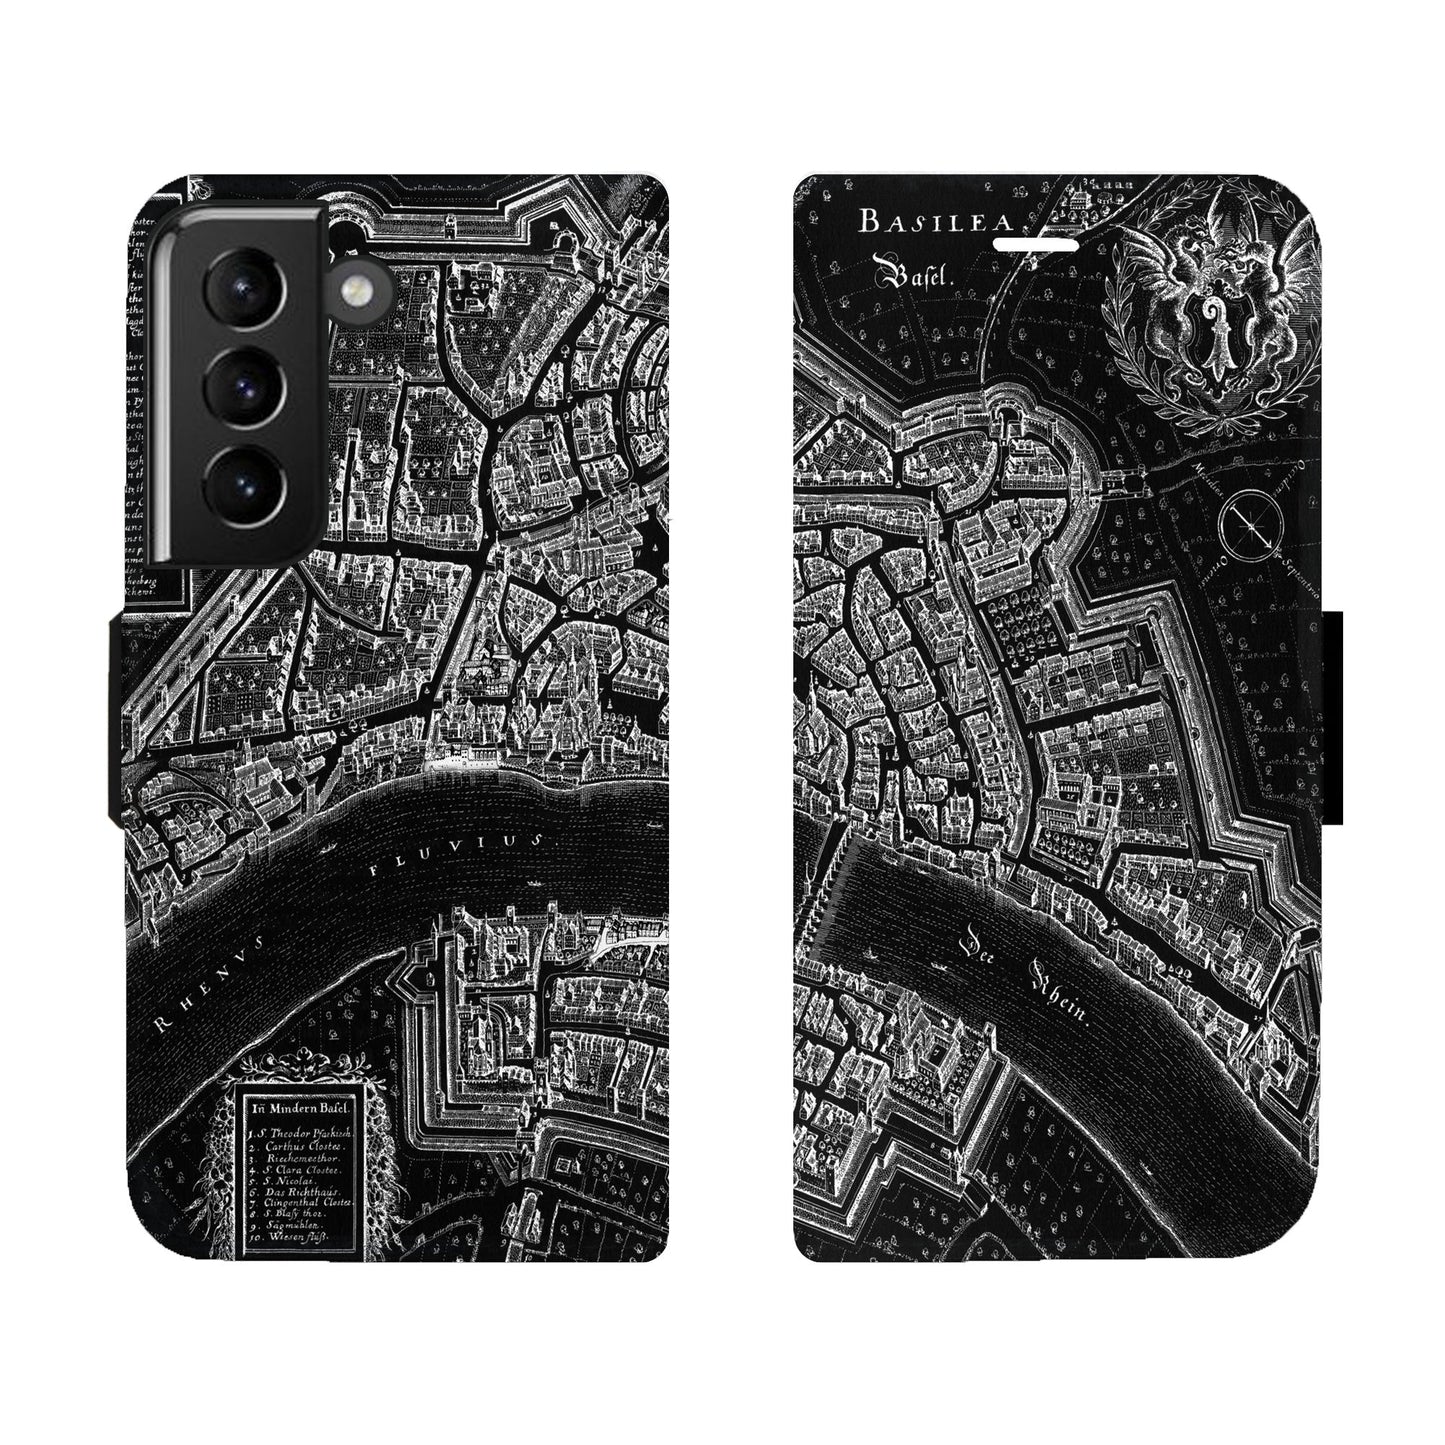 Coque Basel Merian Negative Victor pour iPhone, Samsung et Huawei